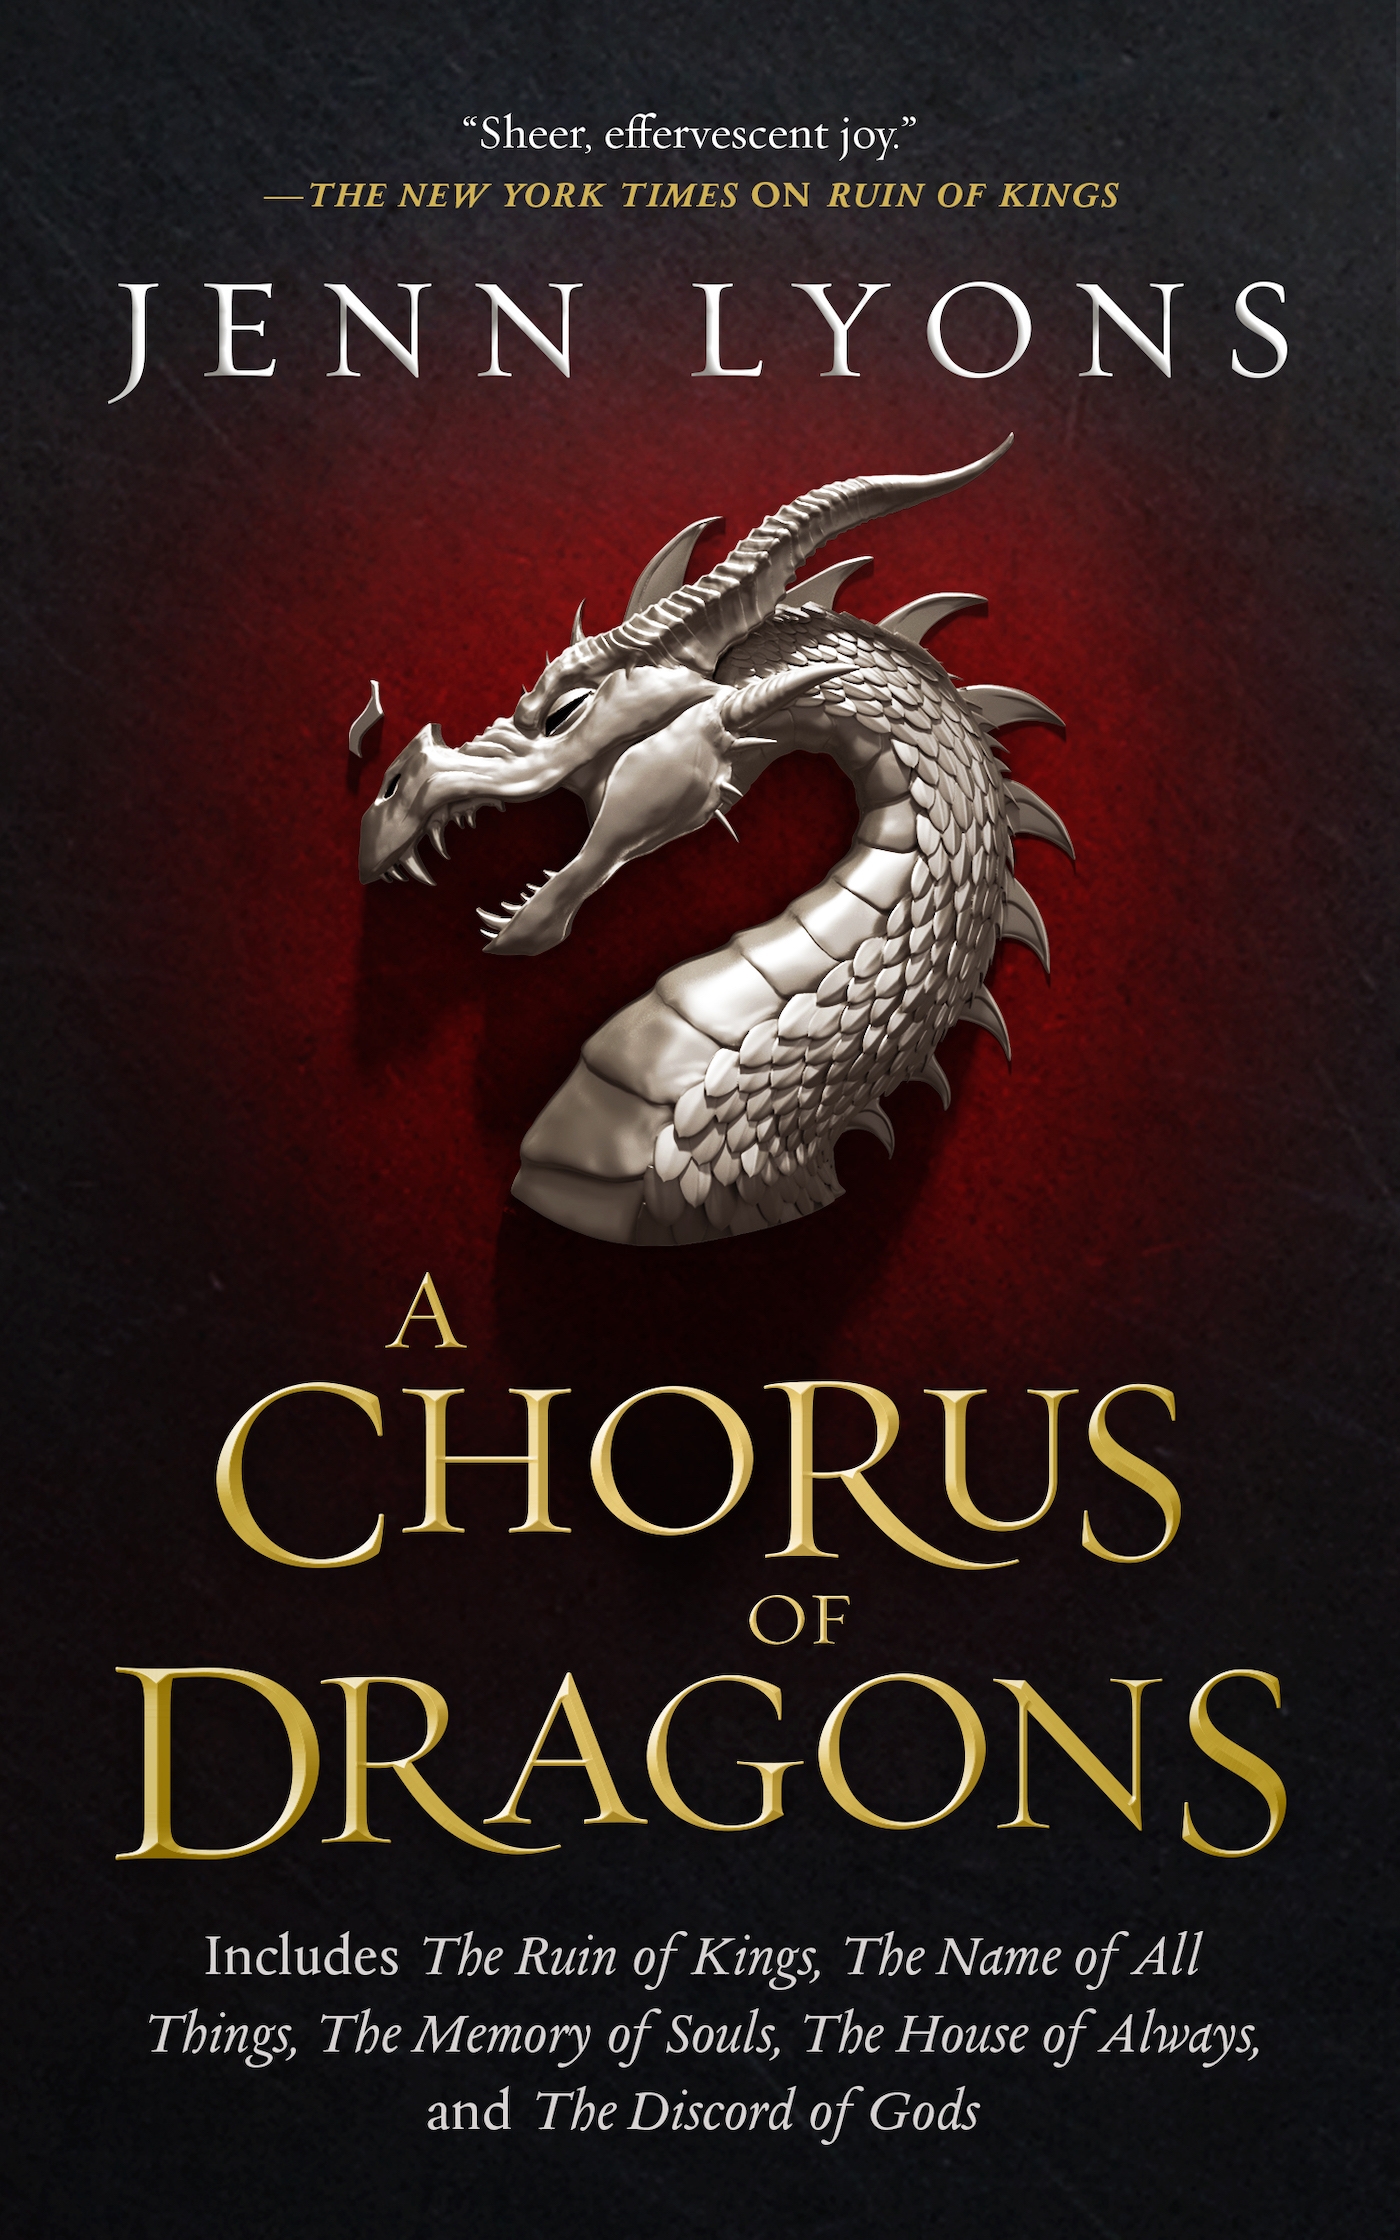 A Chorus of Dragons : The Ruin of Kings, The Name of All Things, The Memory of Souls, The House of Always, The Discord of Gods by Jenn Lyons